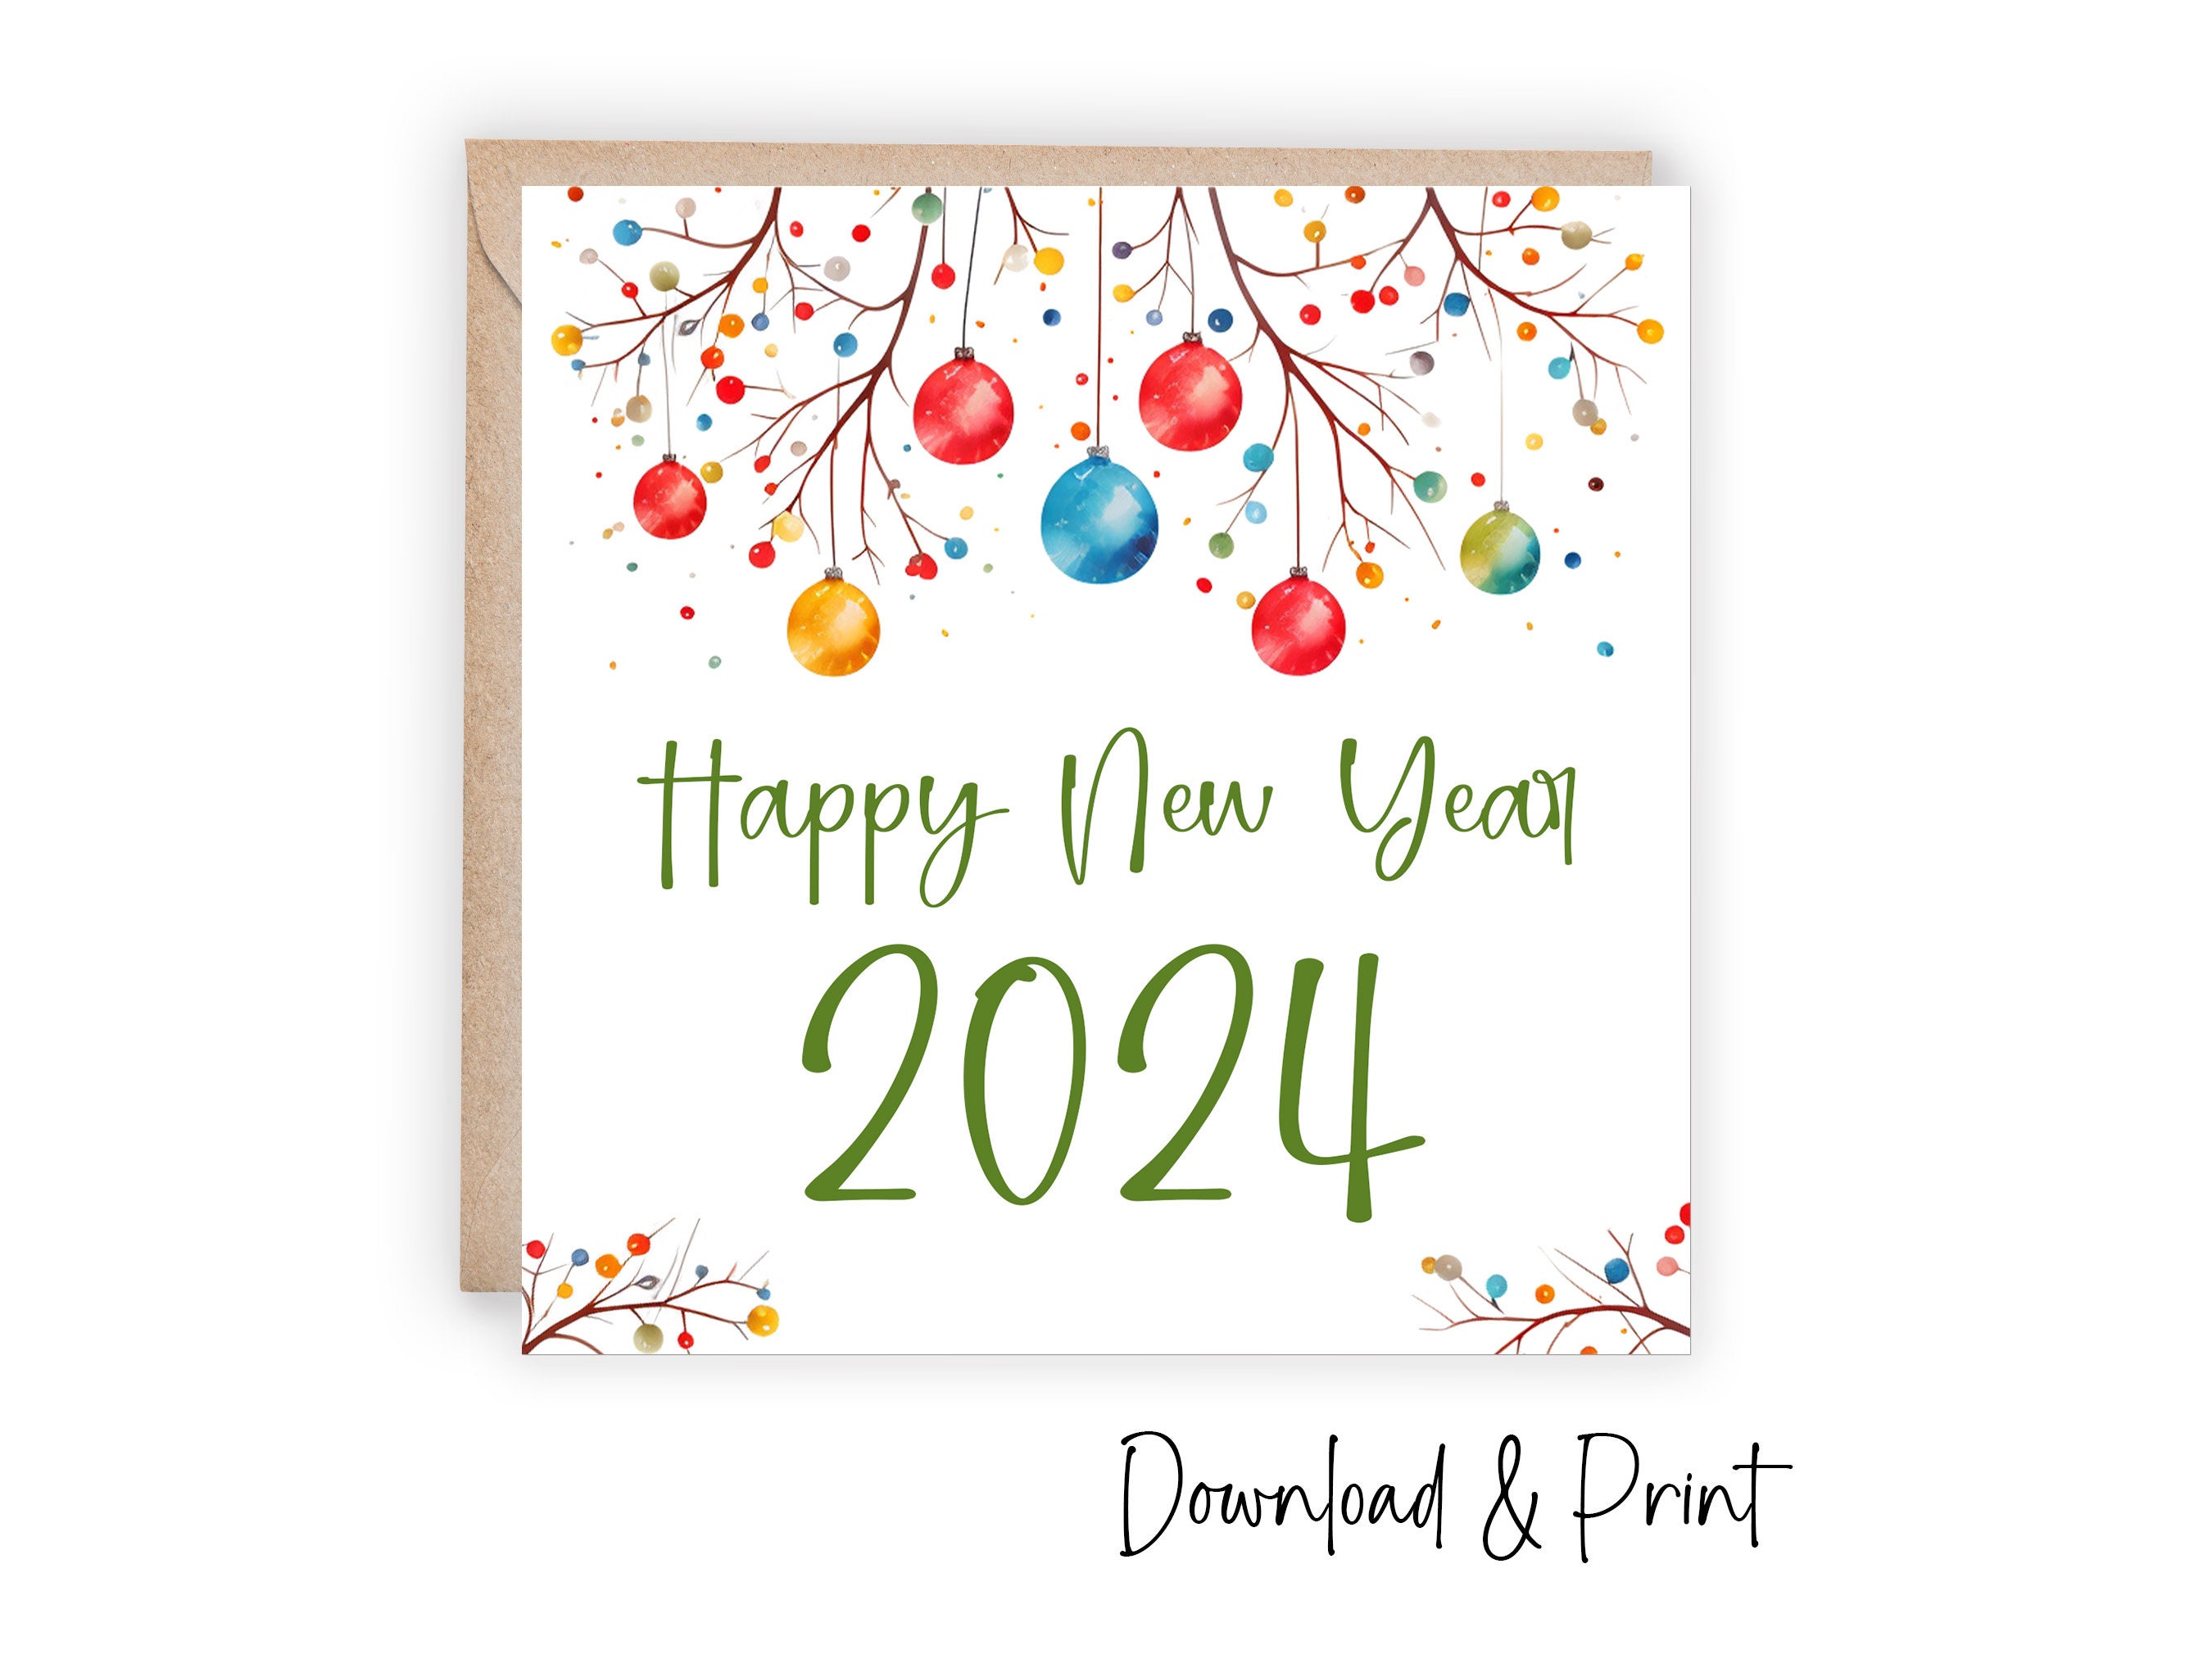 Happy New Year Greeting Cards & Envelopes - 25 Per Pack (A2-4 1/4 x 5 1/2)